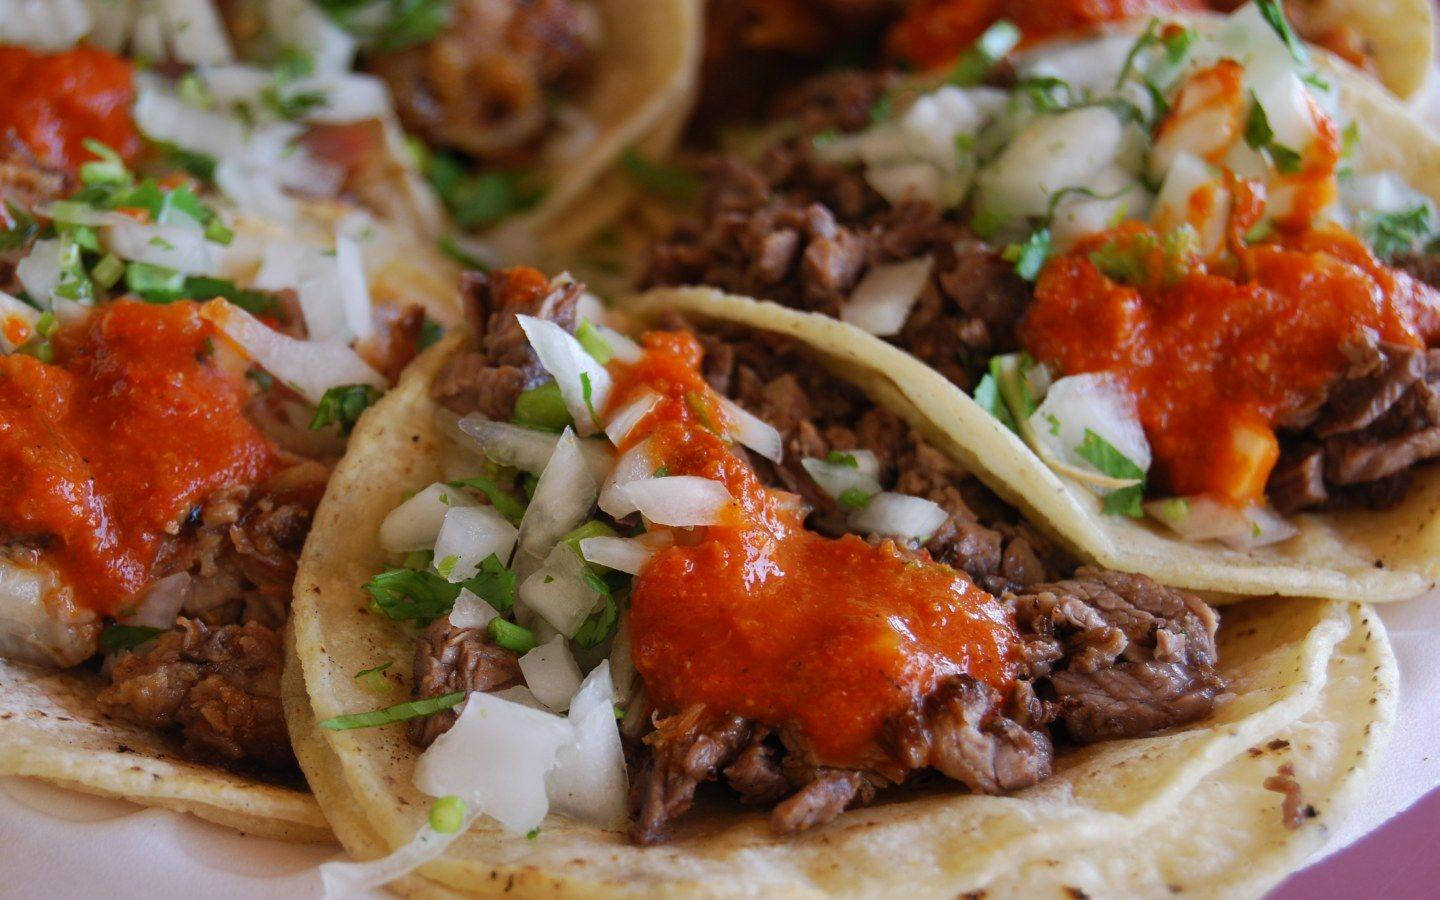 Tantalizing Tacos Al Pastor with Vibrant Spicy Salsa Wallpaper